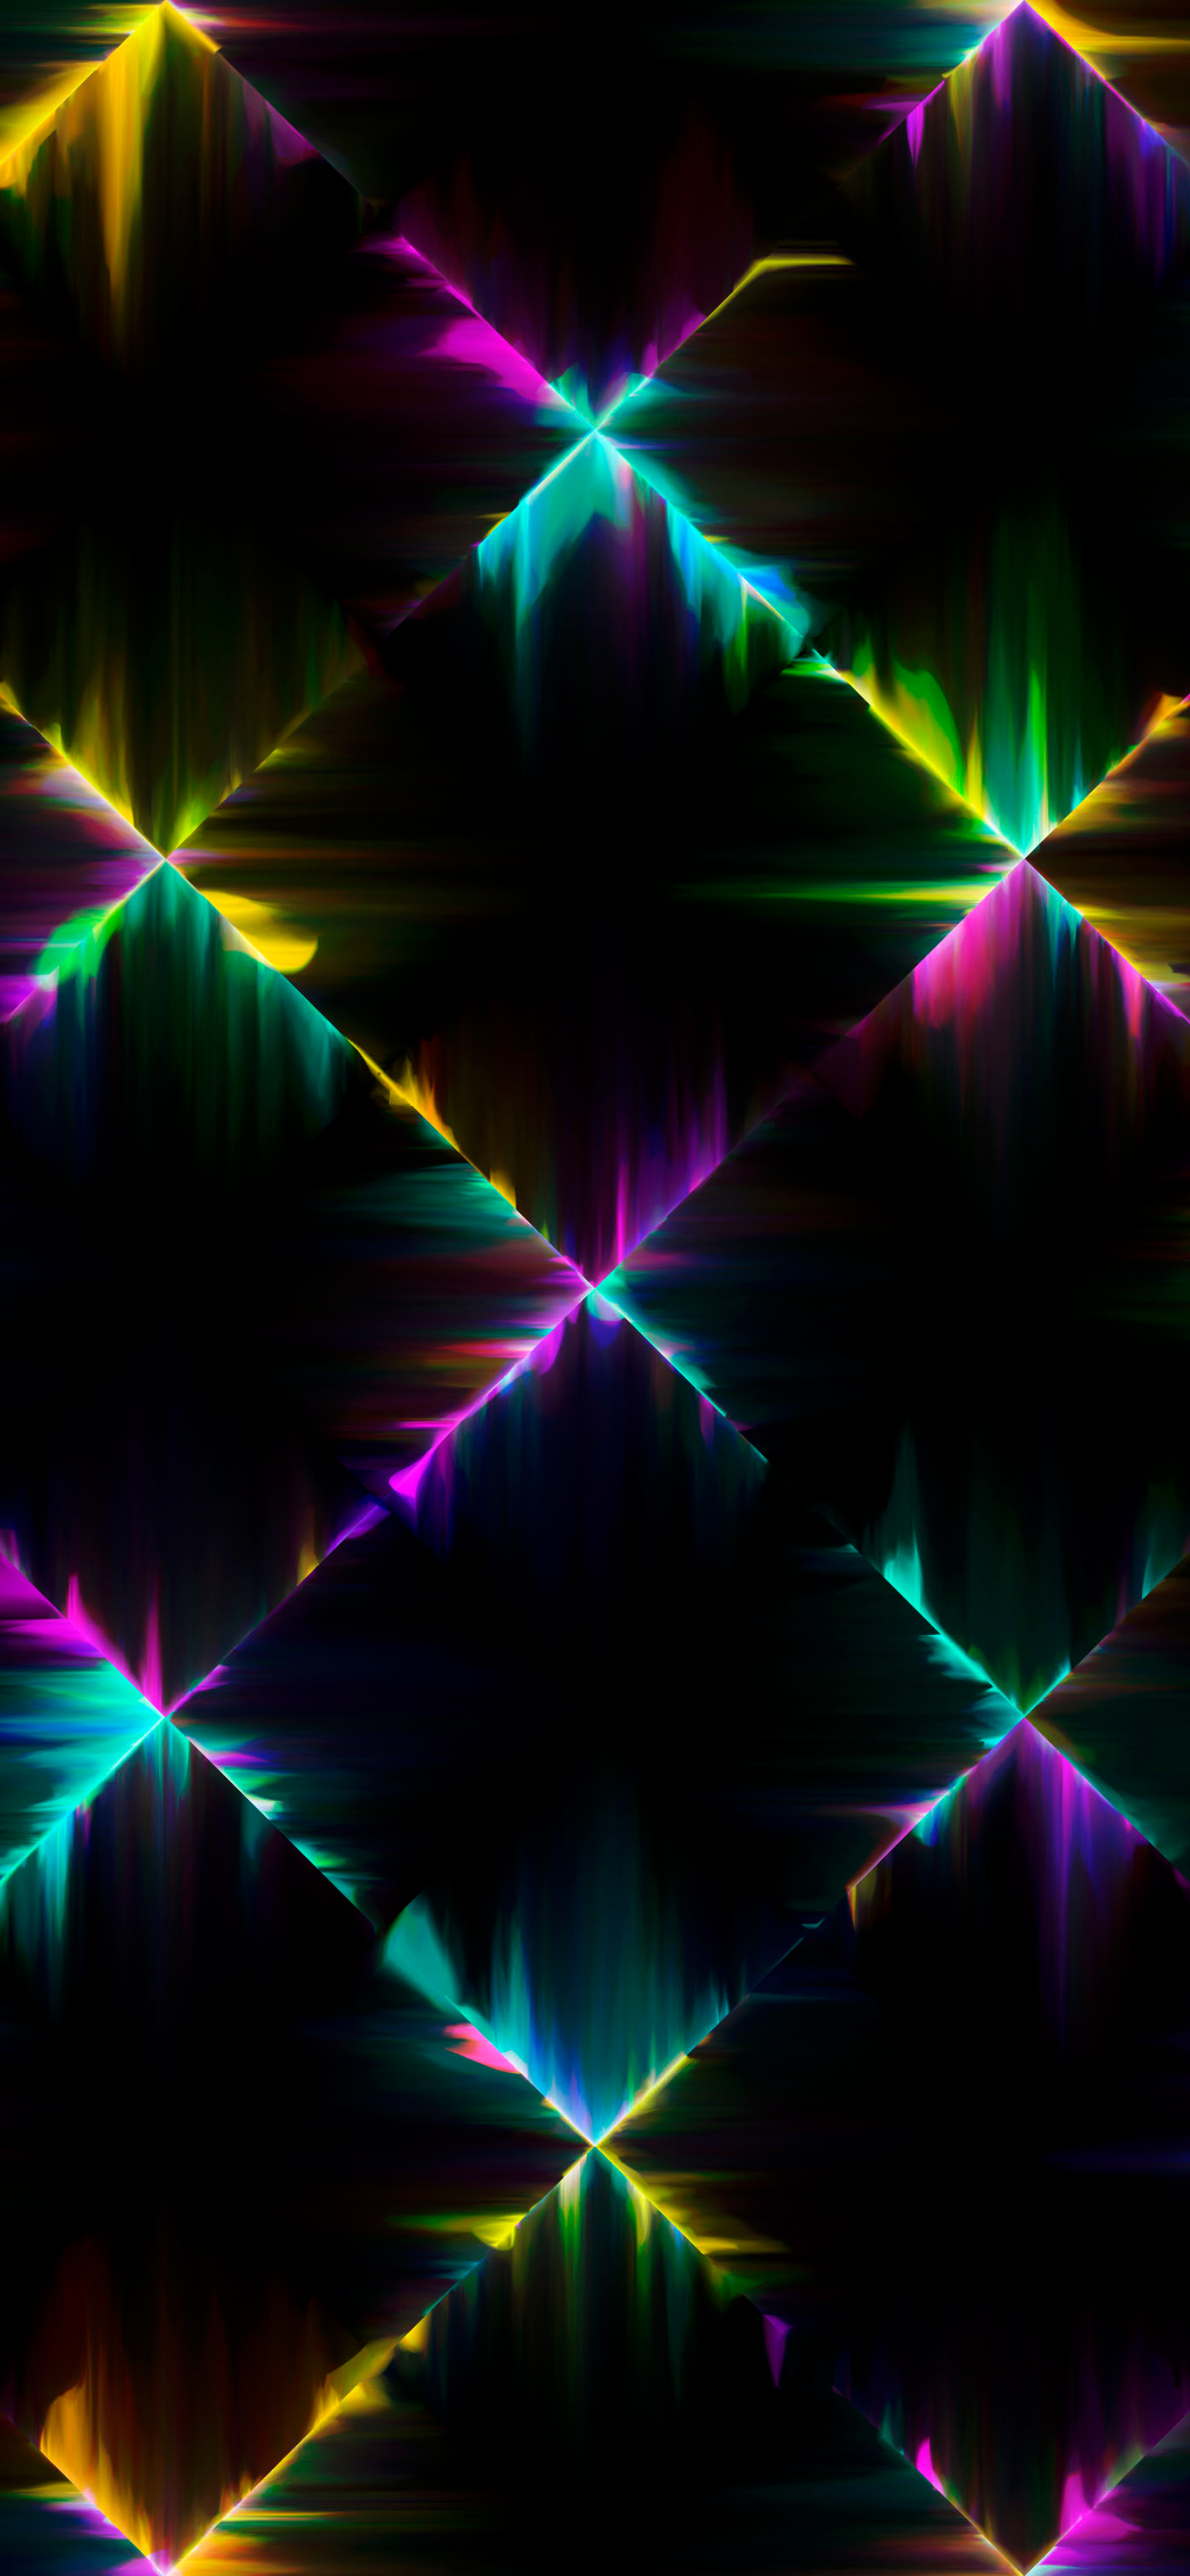 Neon lights 4K Wallpaper, Colorful, Black background, Abstract, #1